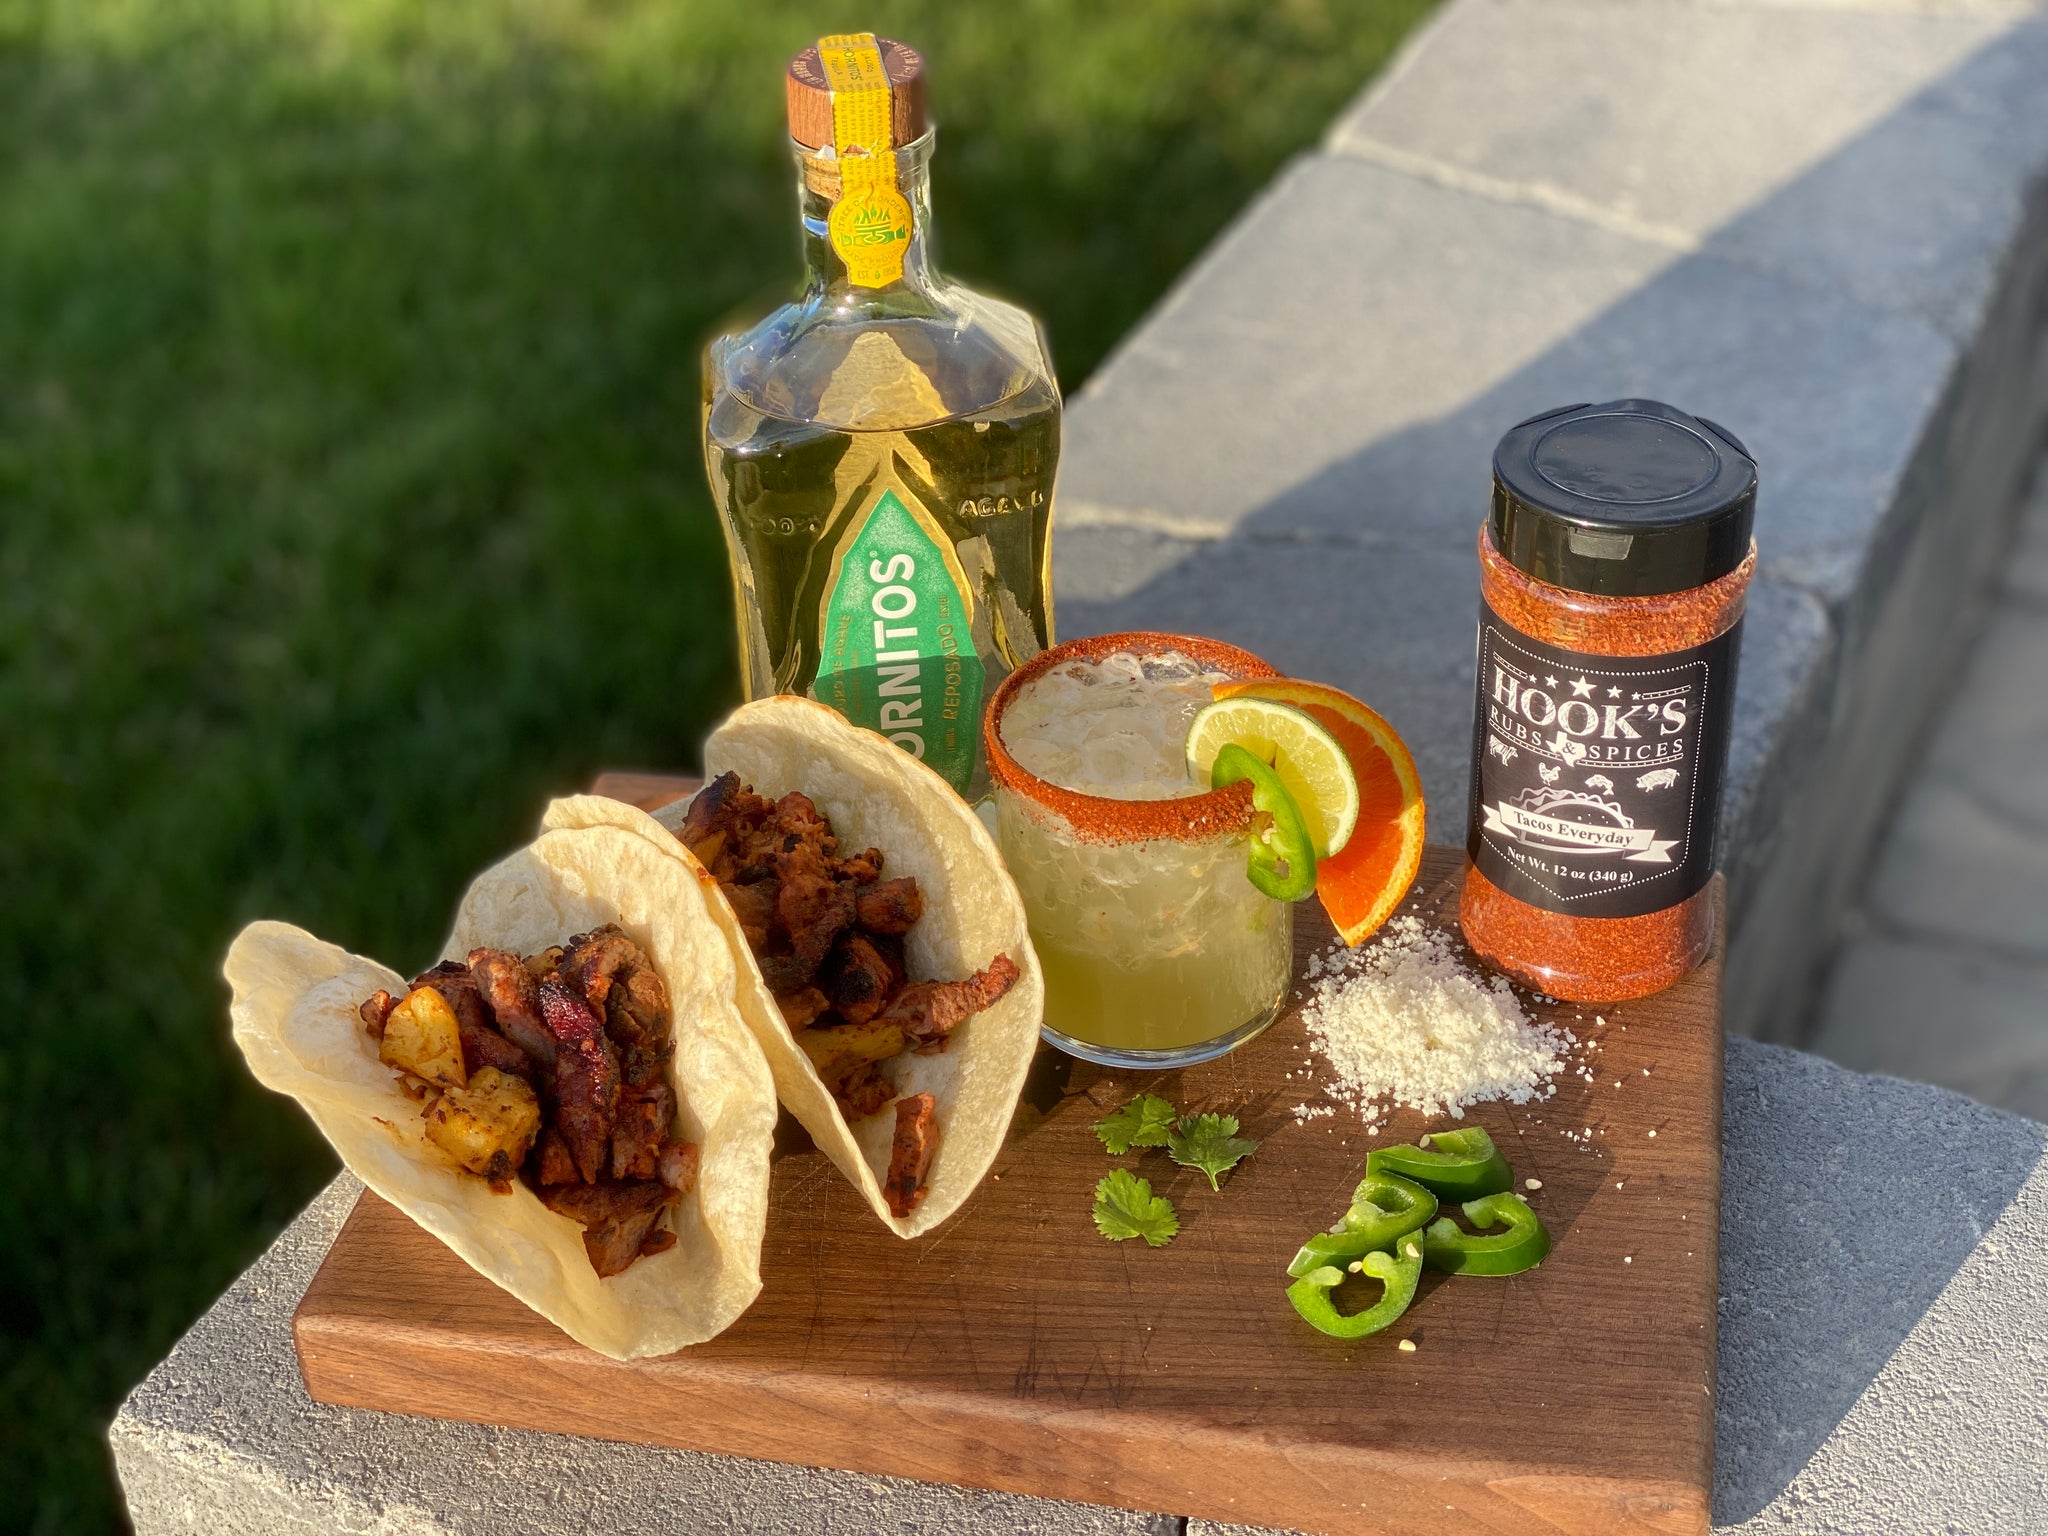 The Rio Grande Margarita with Hook’s Tacos Everyday for Hook’s Rub Thirsty Thursday